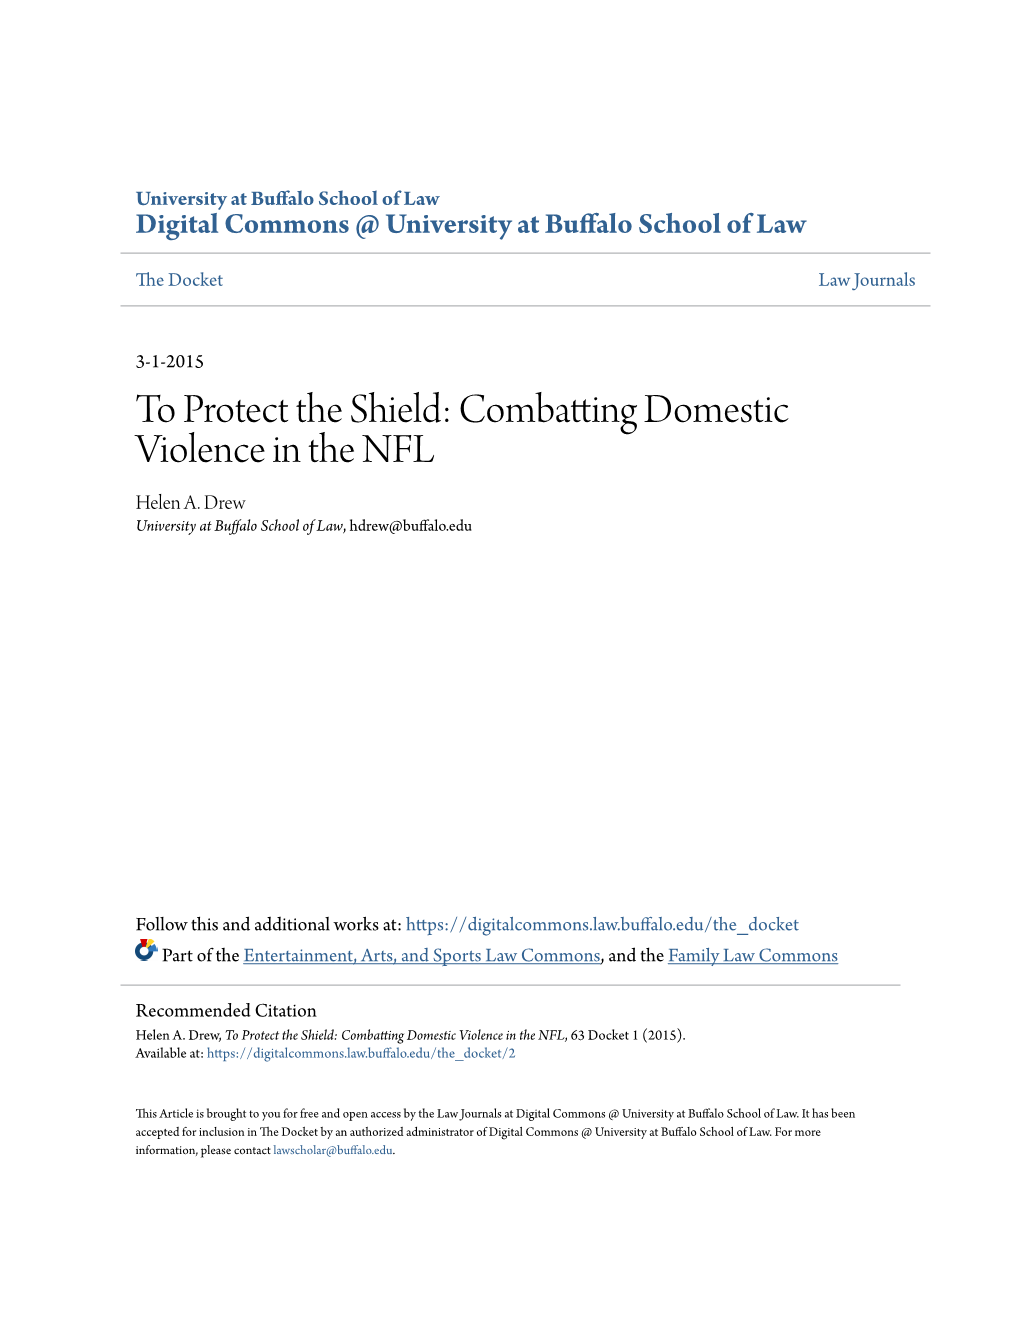 Combatting Domestic Violence in the NFL Helen A